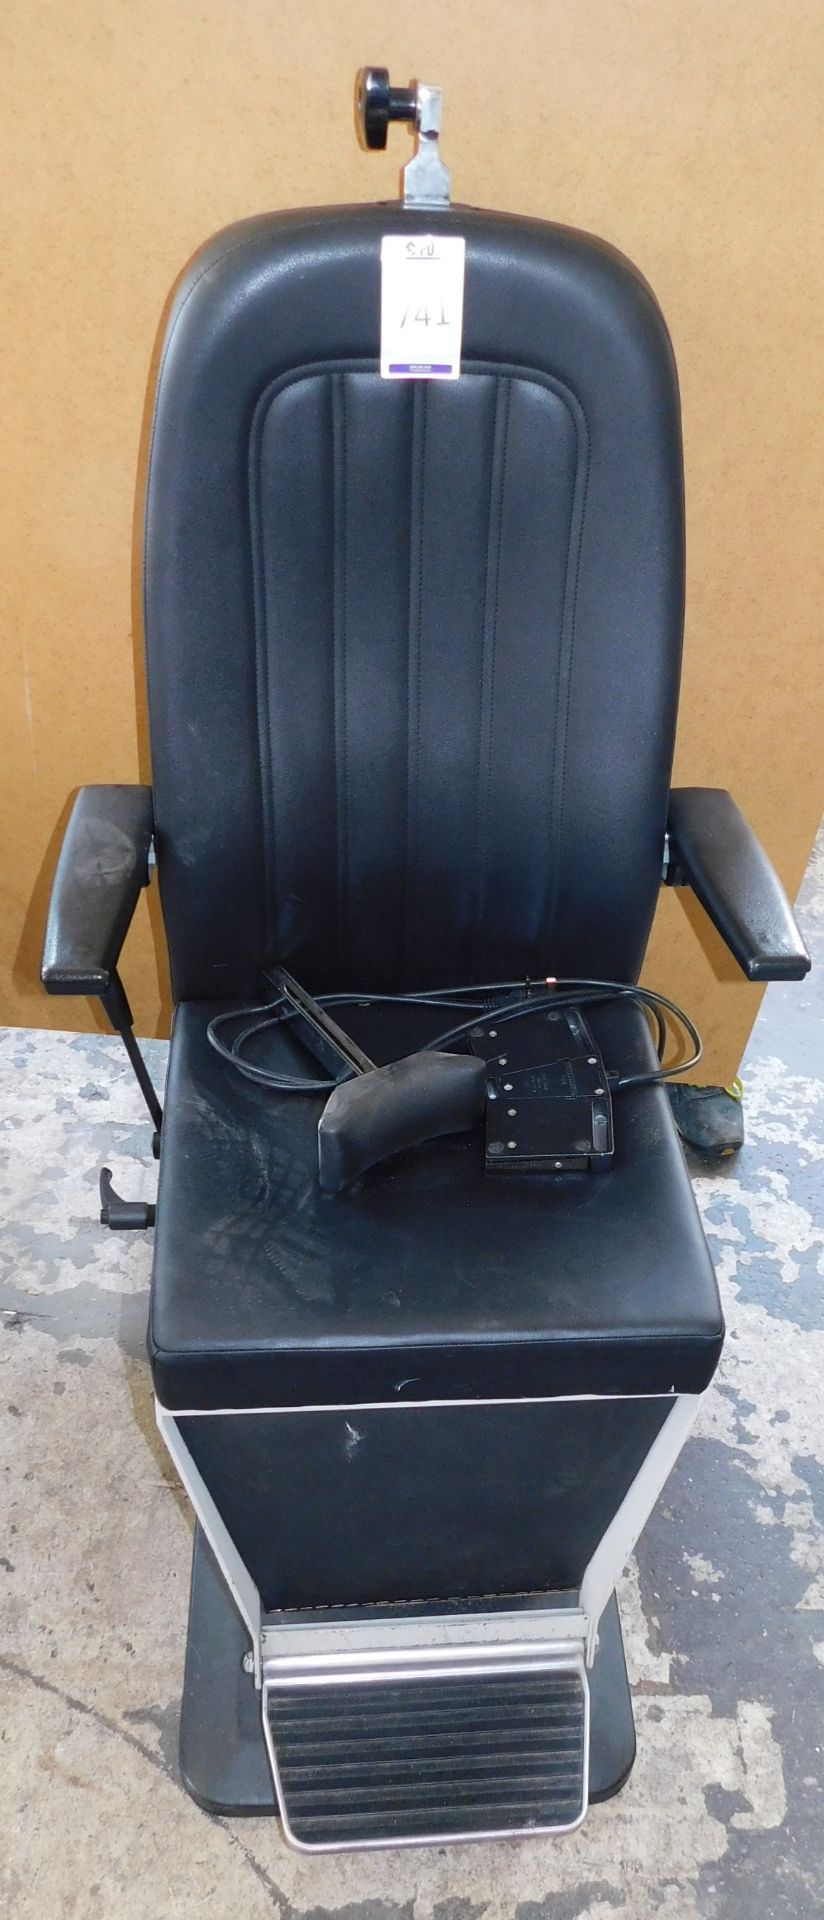 Frastema Electric Leather Patient Chair (Located Stockport – See General Notes for More Details)